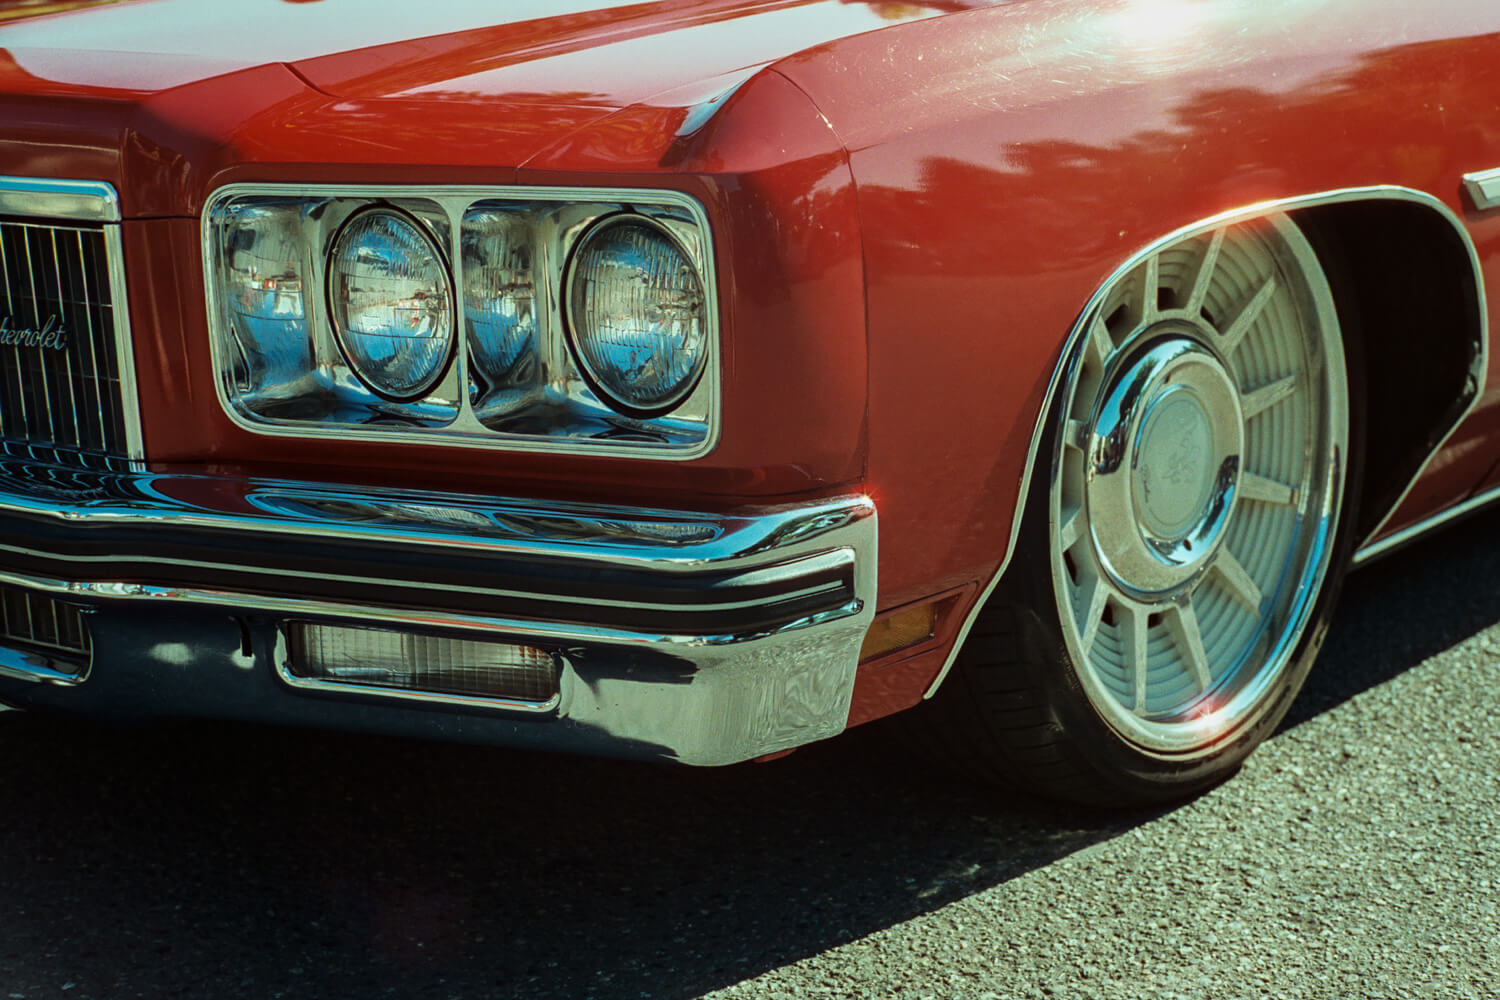 CineStill 400D - Hexar RF - Hexar RF - Red Lowrider - You can see the greenish undertone on this shot along with some halations on the shiny chrome.